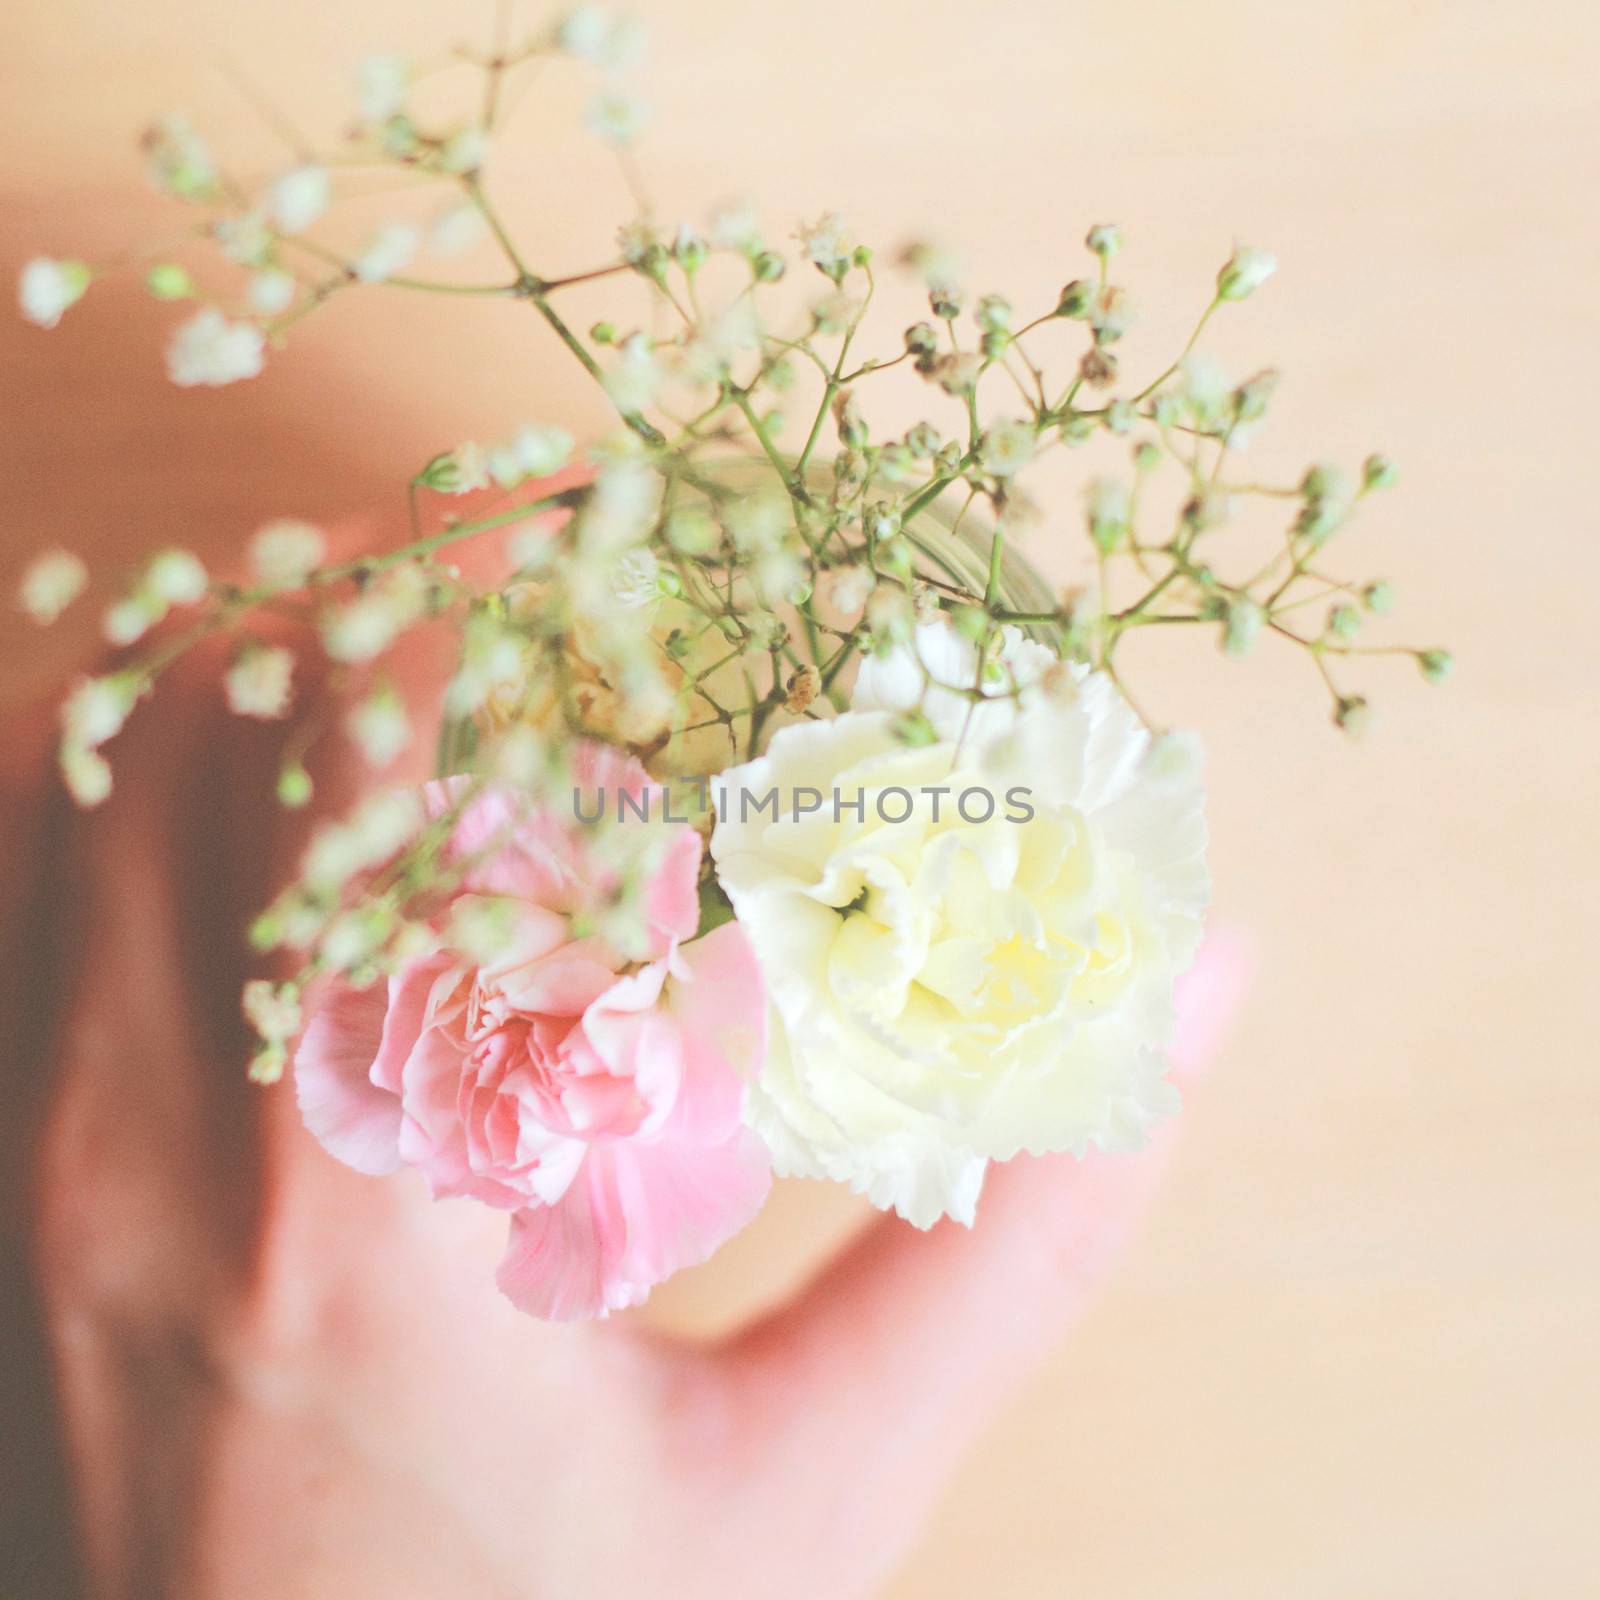 Woman hand holding flower with retro filter effect by nuchylee